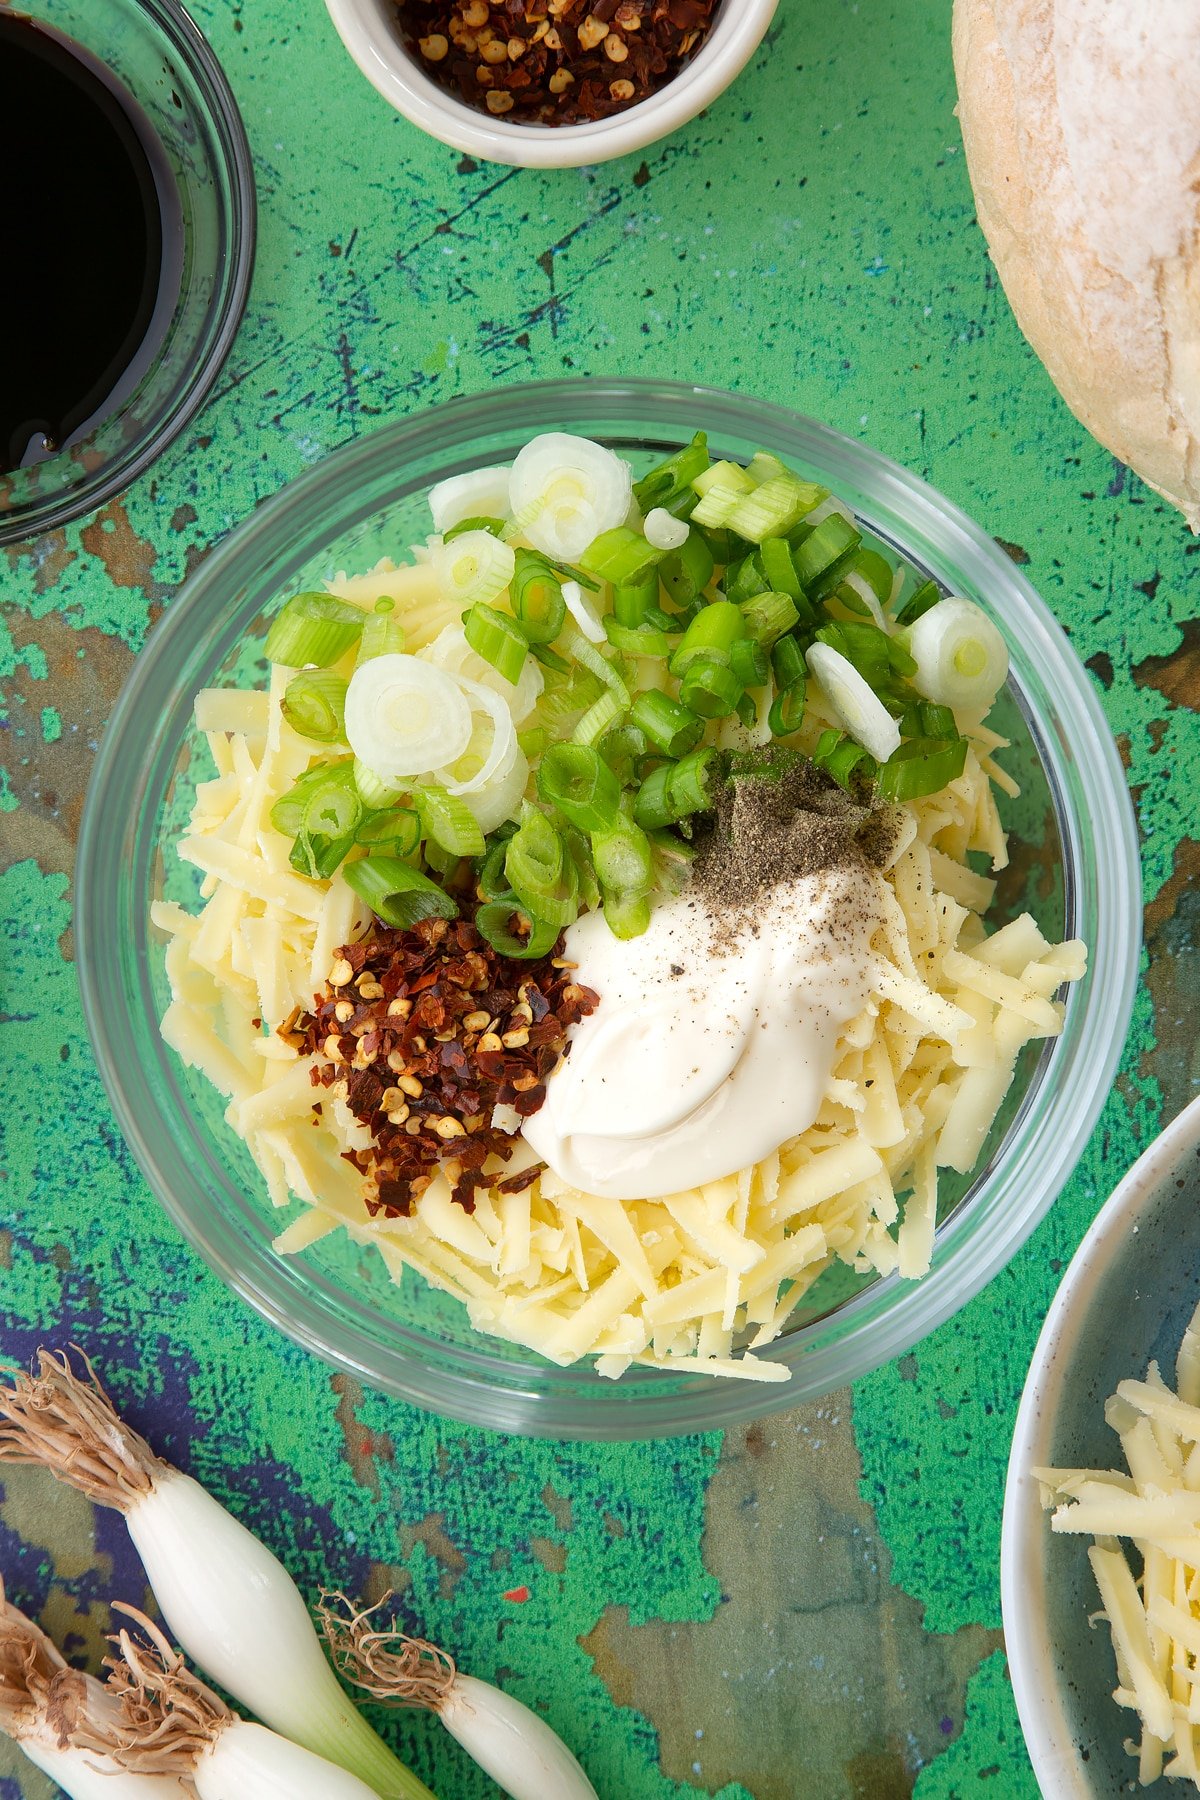 Cheddar, chilli flakes, spring onions, soy sauce, mayo and a pinch of pepper in a mixing bowl. Ingredients to make chilli cheese toast surround the bowl.